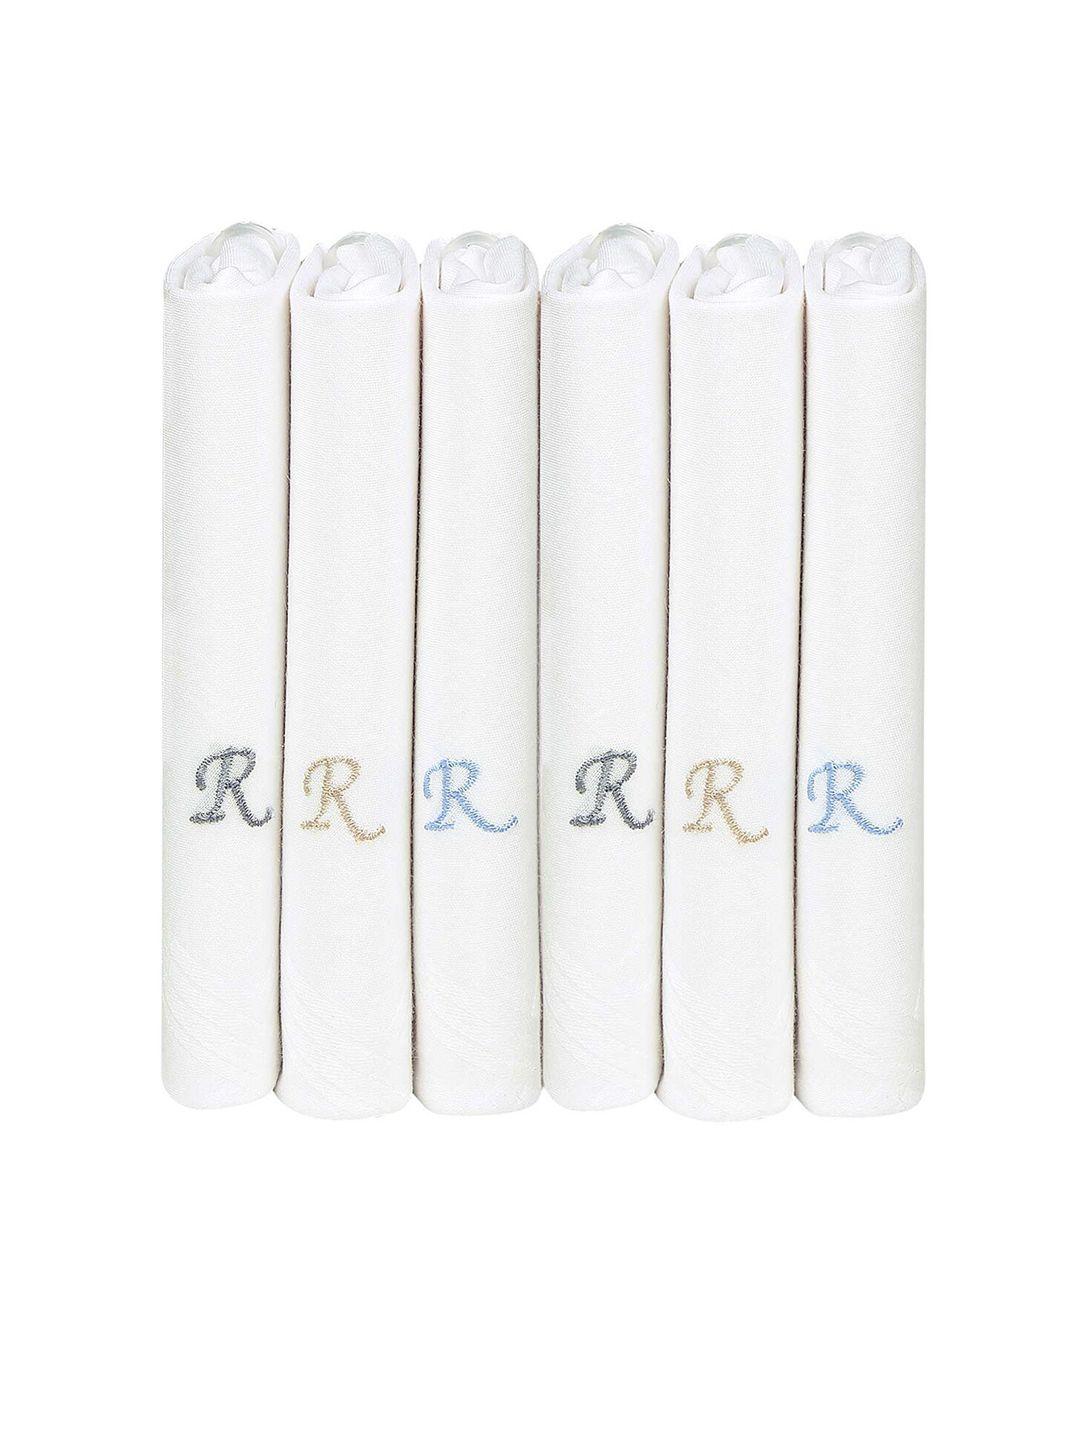 bonjour-men-pack-of-6-white-solid-handkerchiefs-accessory-gift-set-with-r-initials